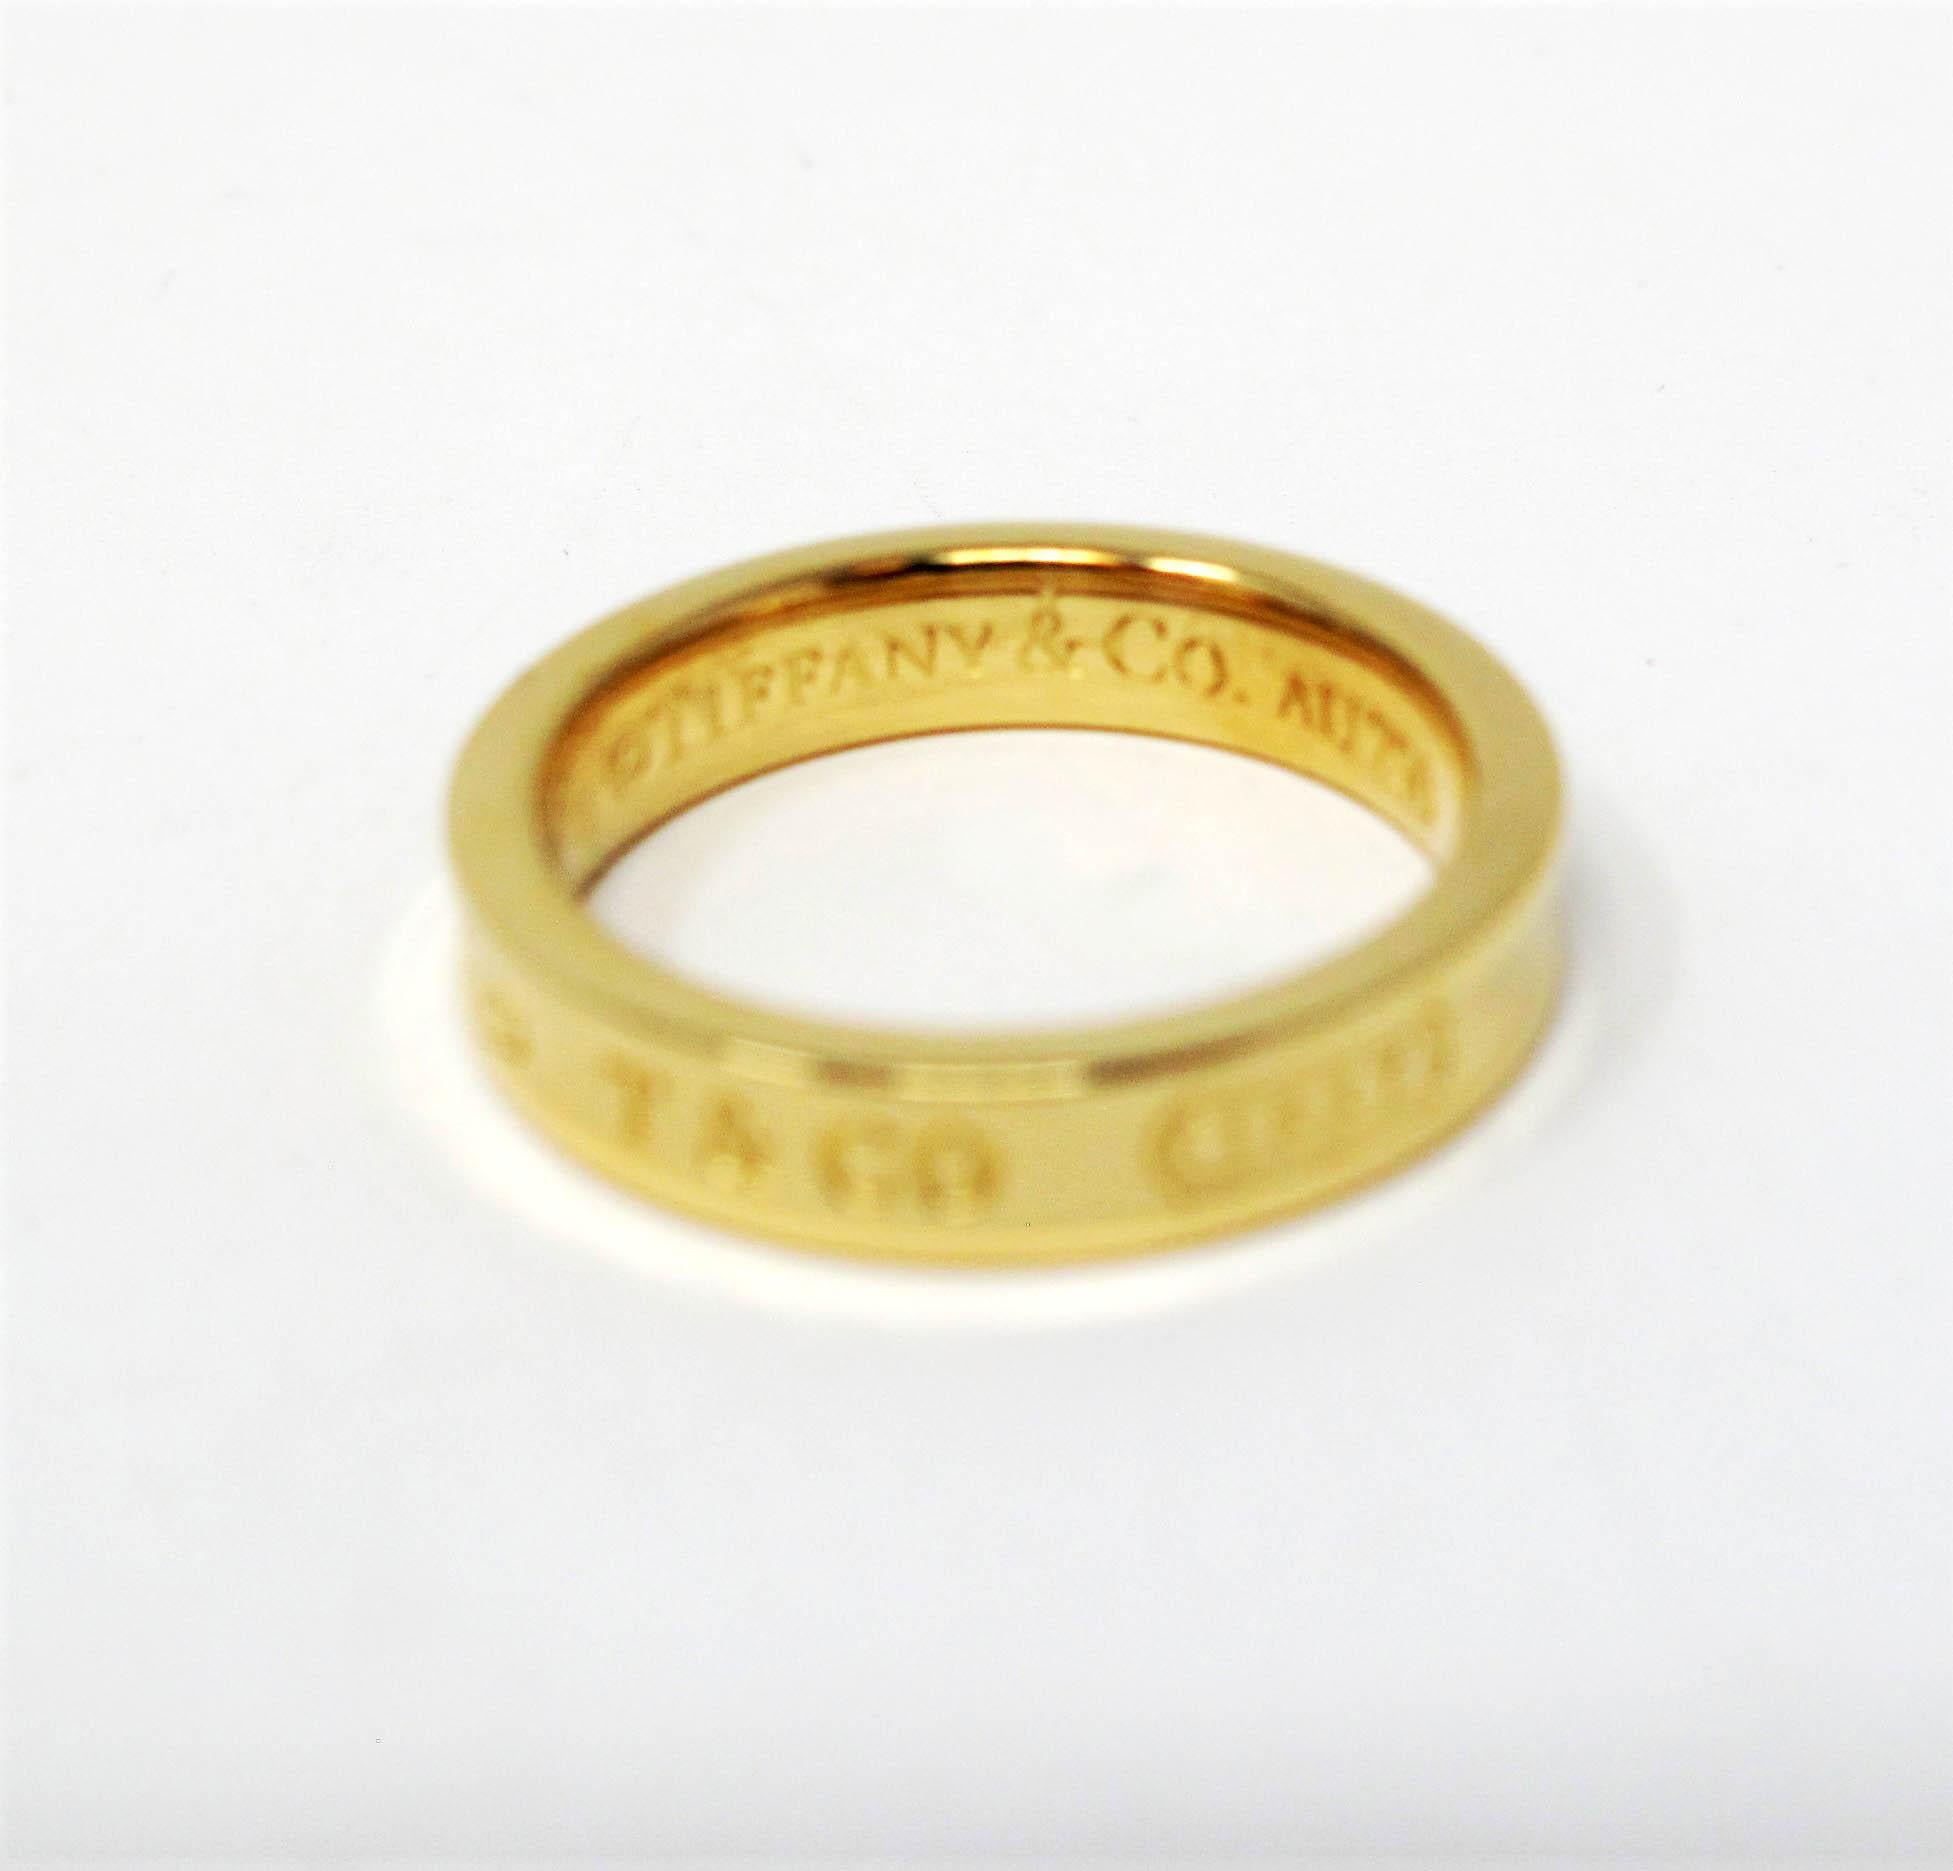 Contemporary Tiffany & Co. Tiffany 1837 Collection Engraved Band Ring in 18 Karat Yellow Gold For Sale